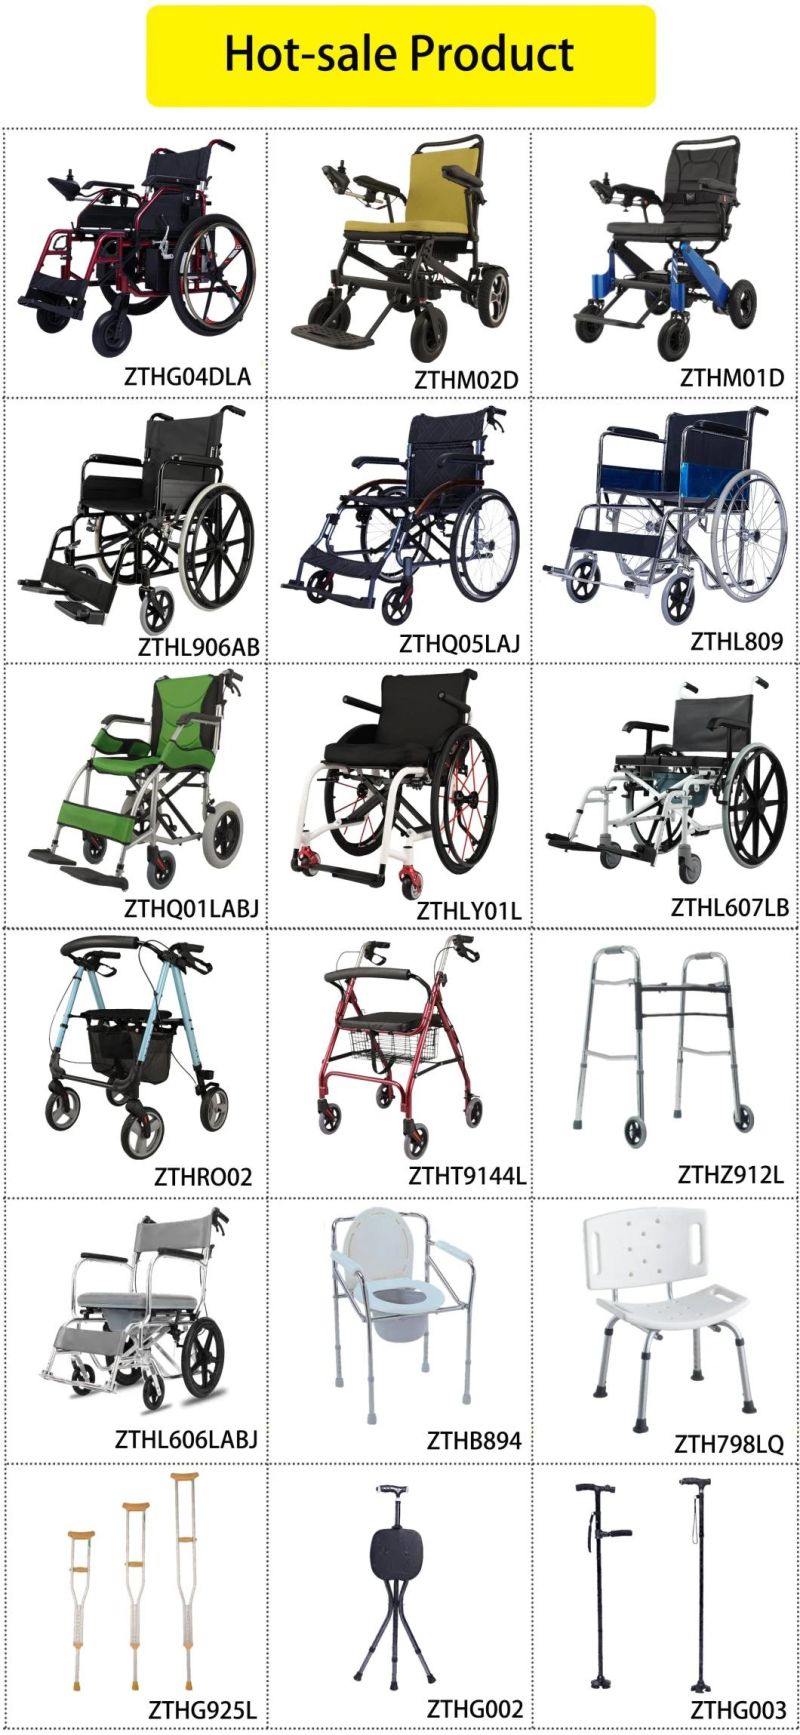 Outdoors Steel Aluminum Alloy Folding Electric Toilet OEM Customized Manual Disabled Elderly Accessibilitymotion Factory Wheelchair